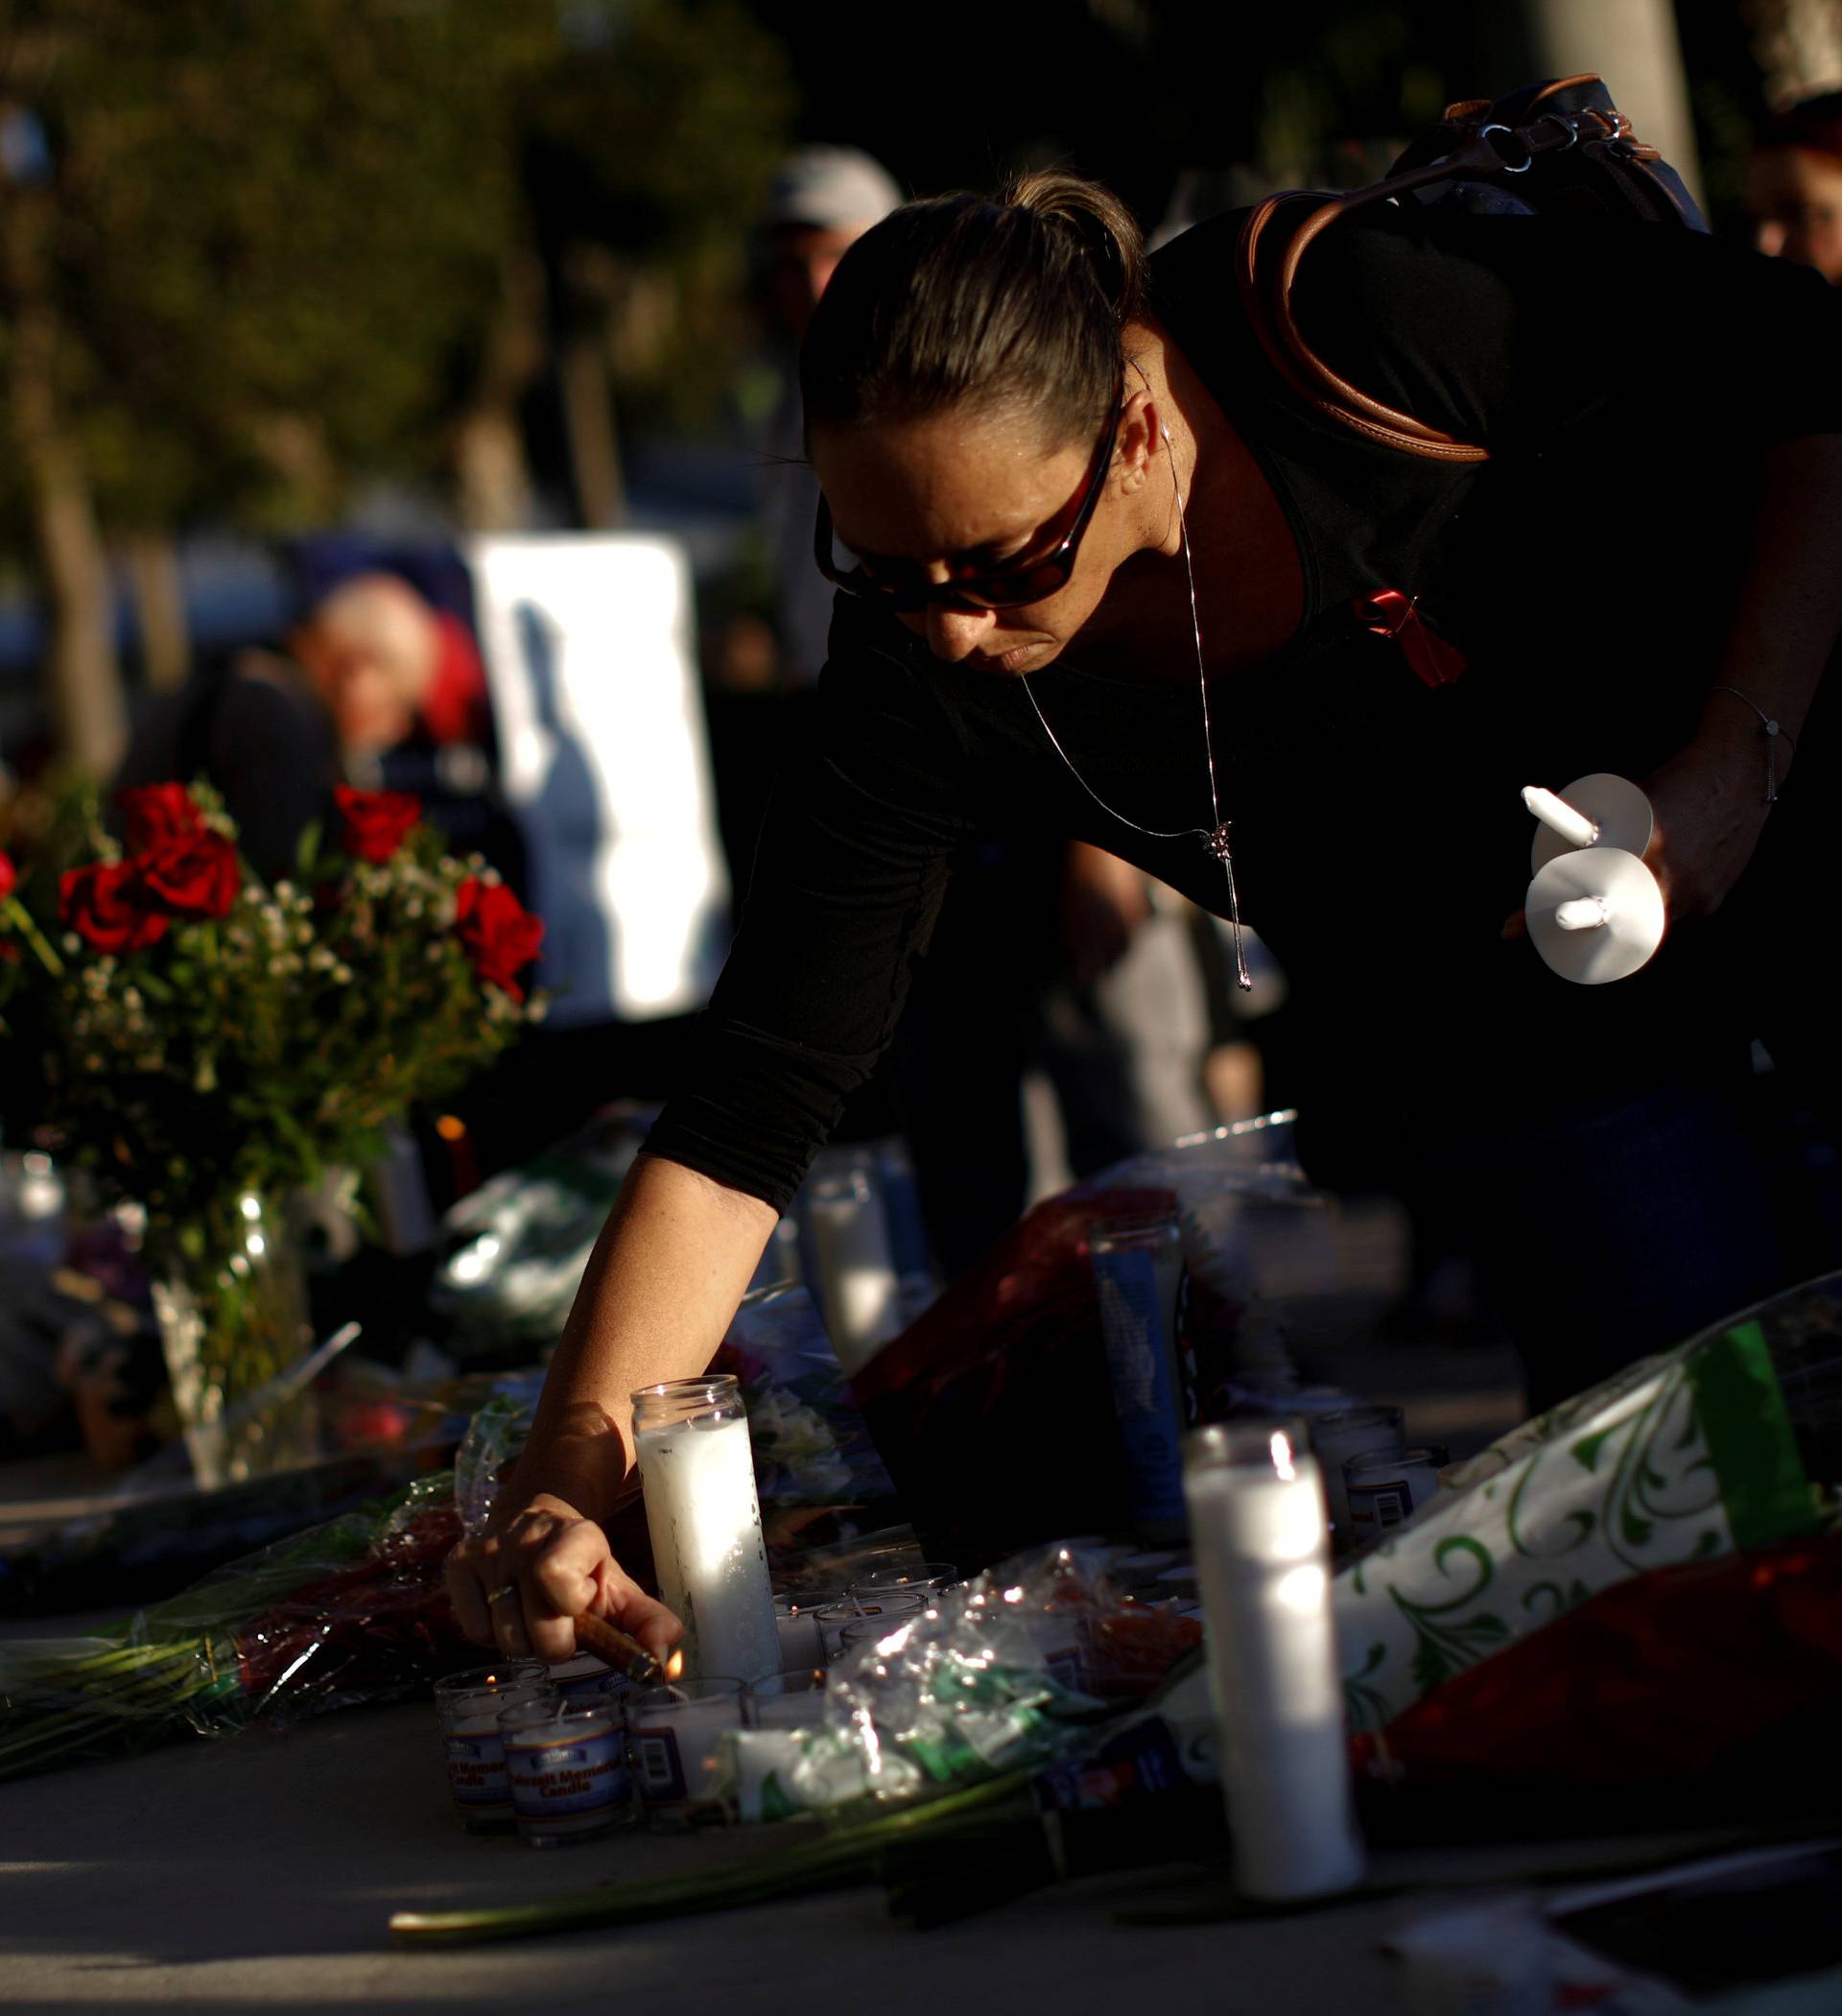 A woman lights a candle during a vigil for victims of yesterday's shooting at nearby Marjory Stoneman Douglas High School, in Parkland